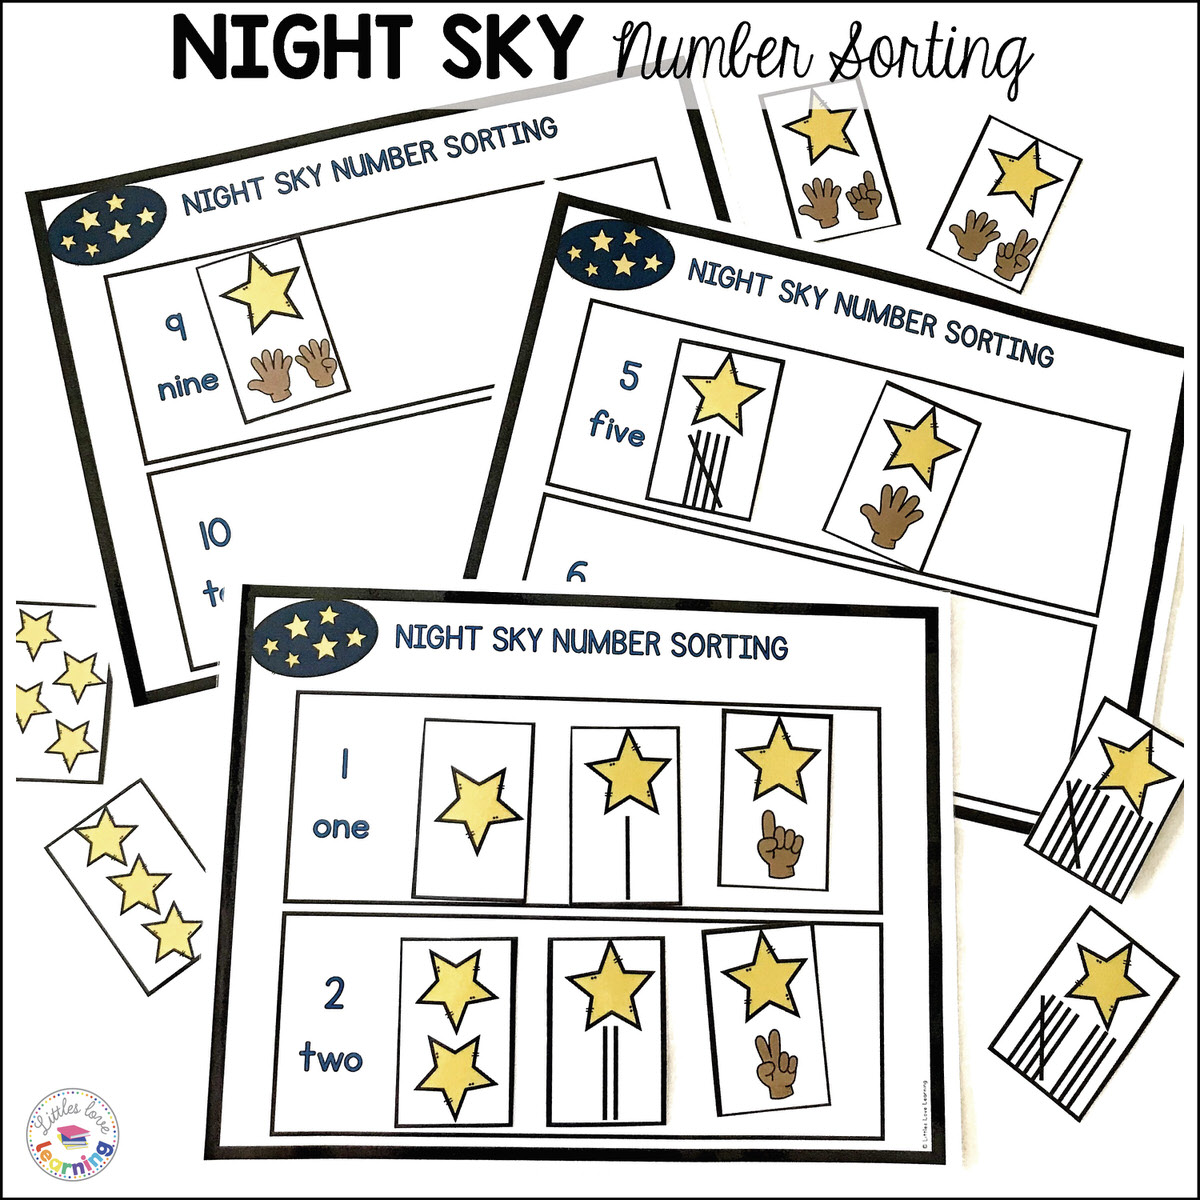 The BEST Nocturnal Animals Activity Pack (Math & Literacy Printables)